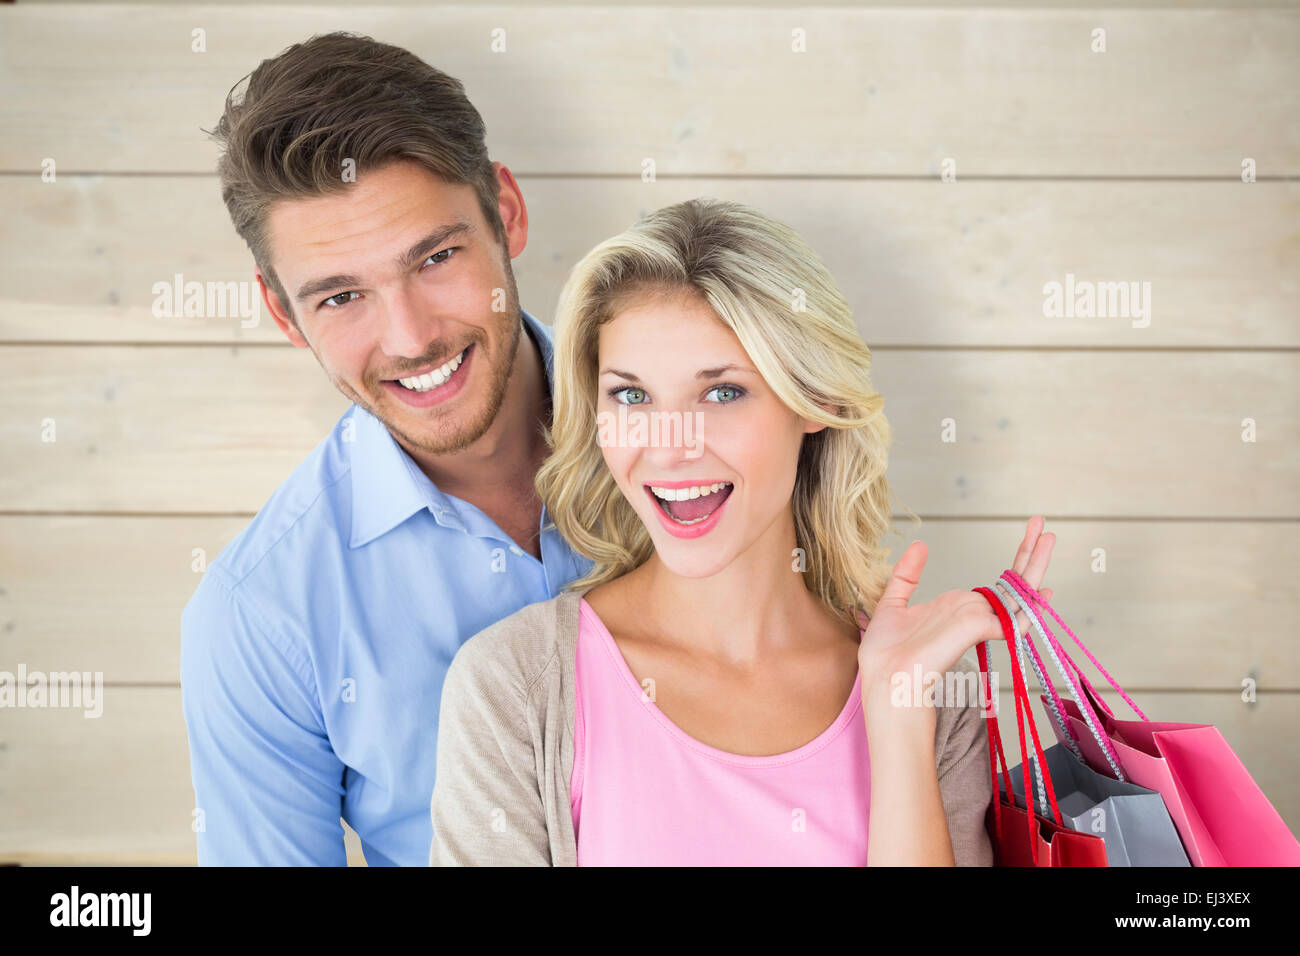 Composite image of attractive young couple holding shopping bags Stock Photo